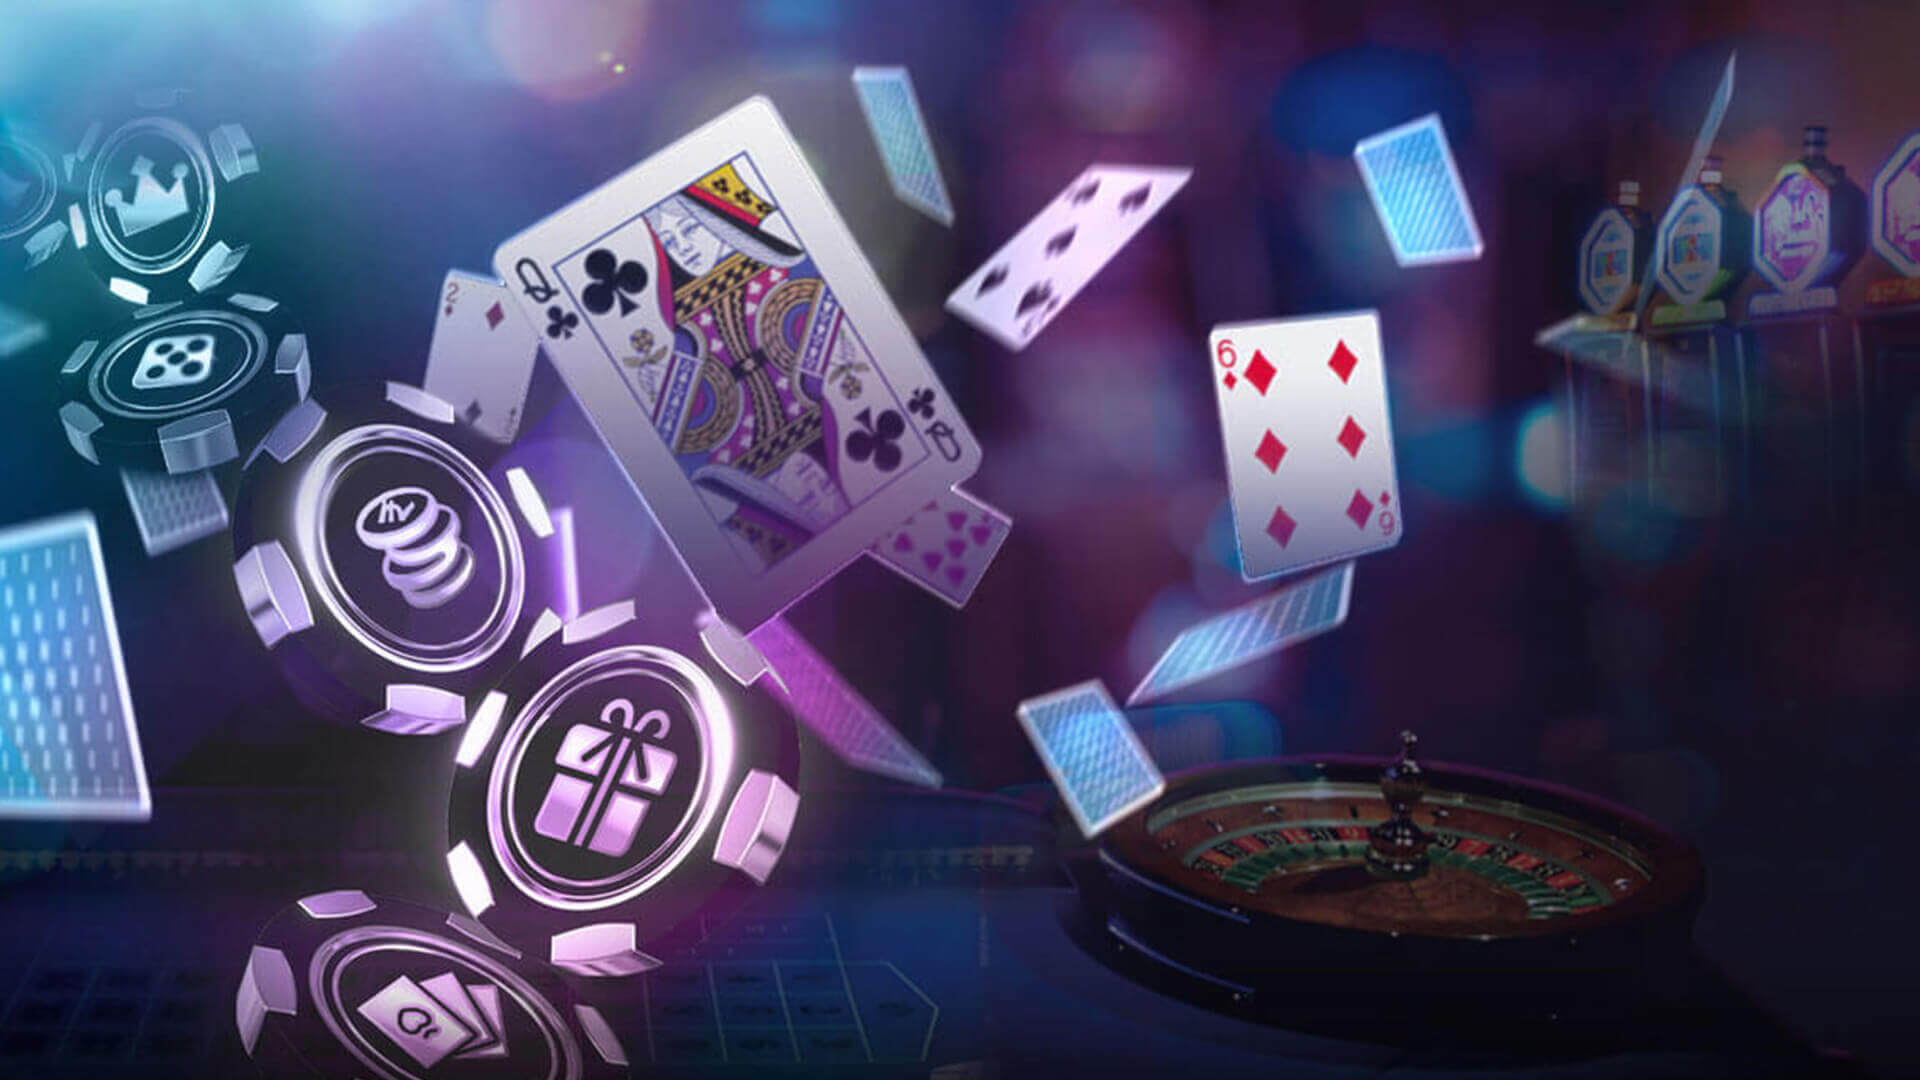 Online gambling is producing place in internet world